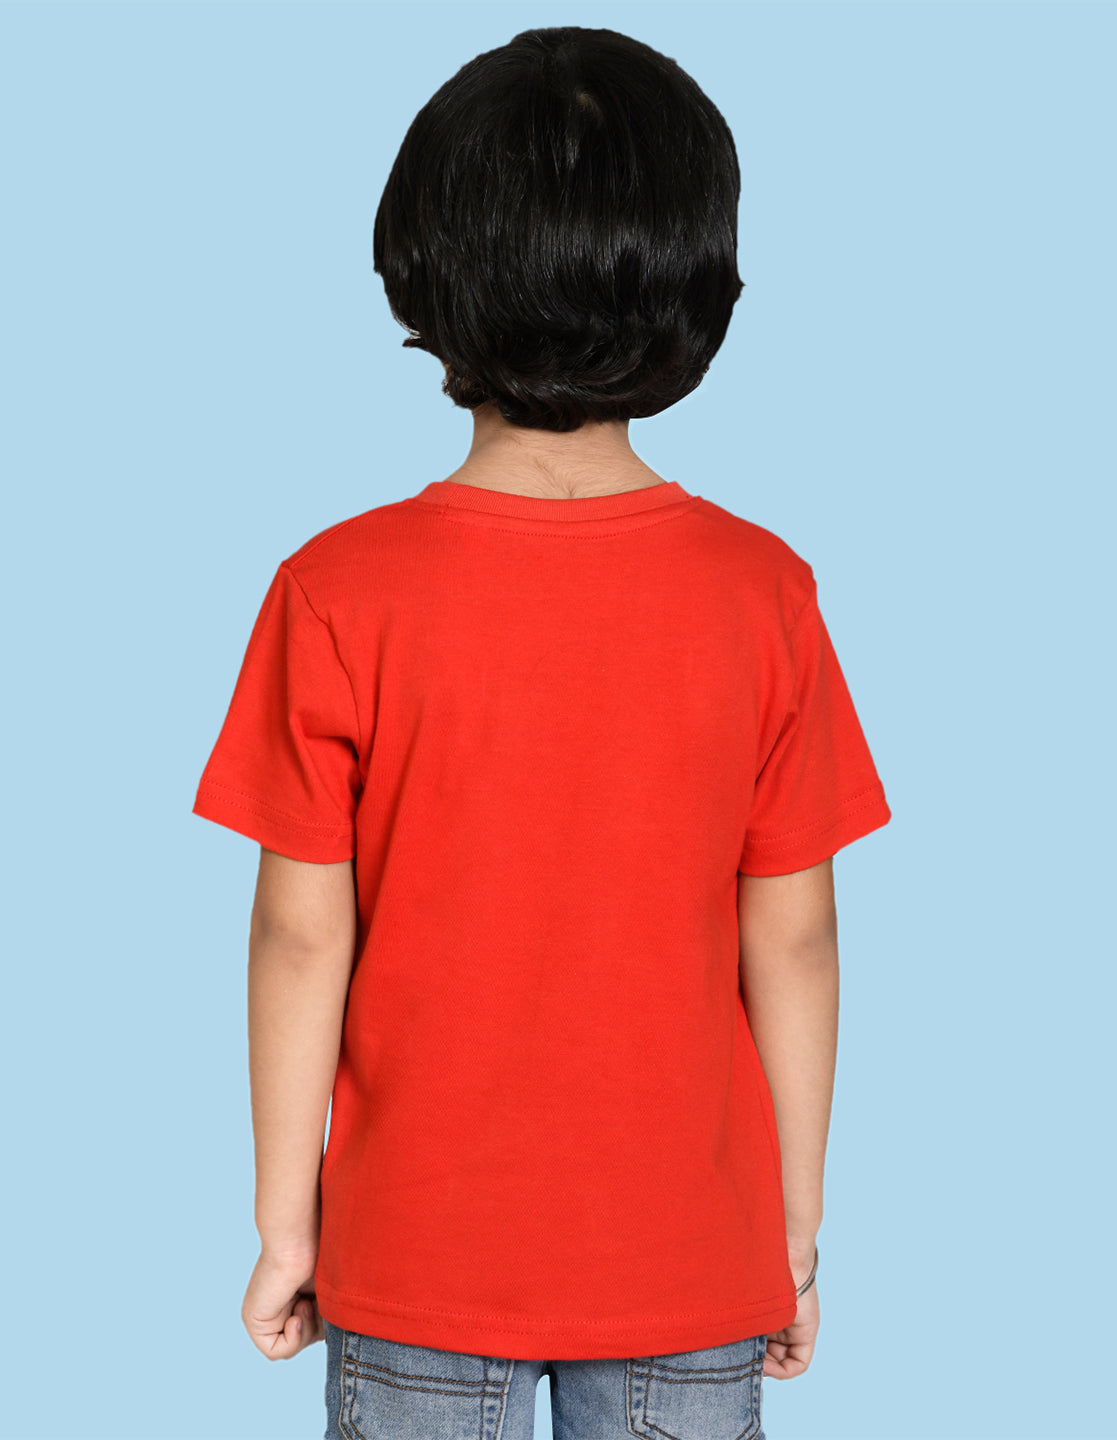 NUSYL Boys Red Bio Washed Cotton Short Sleeve Solid T-shirt